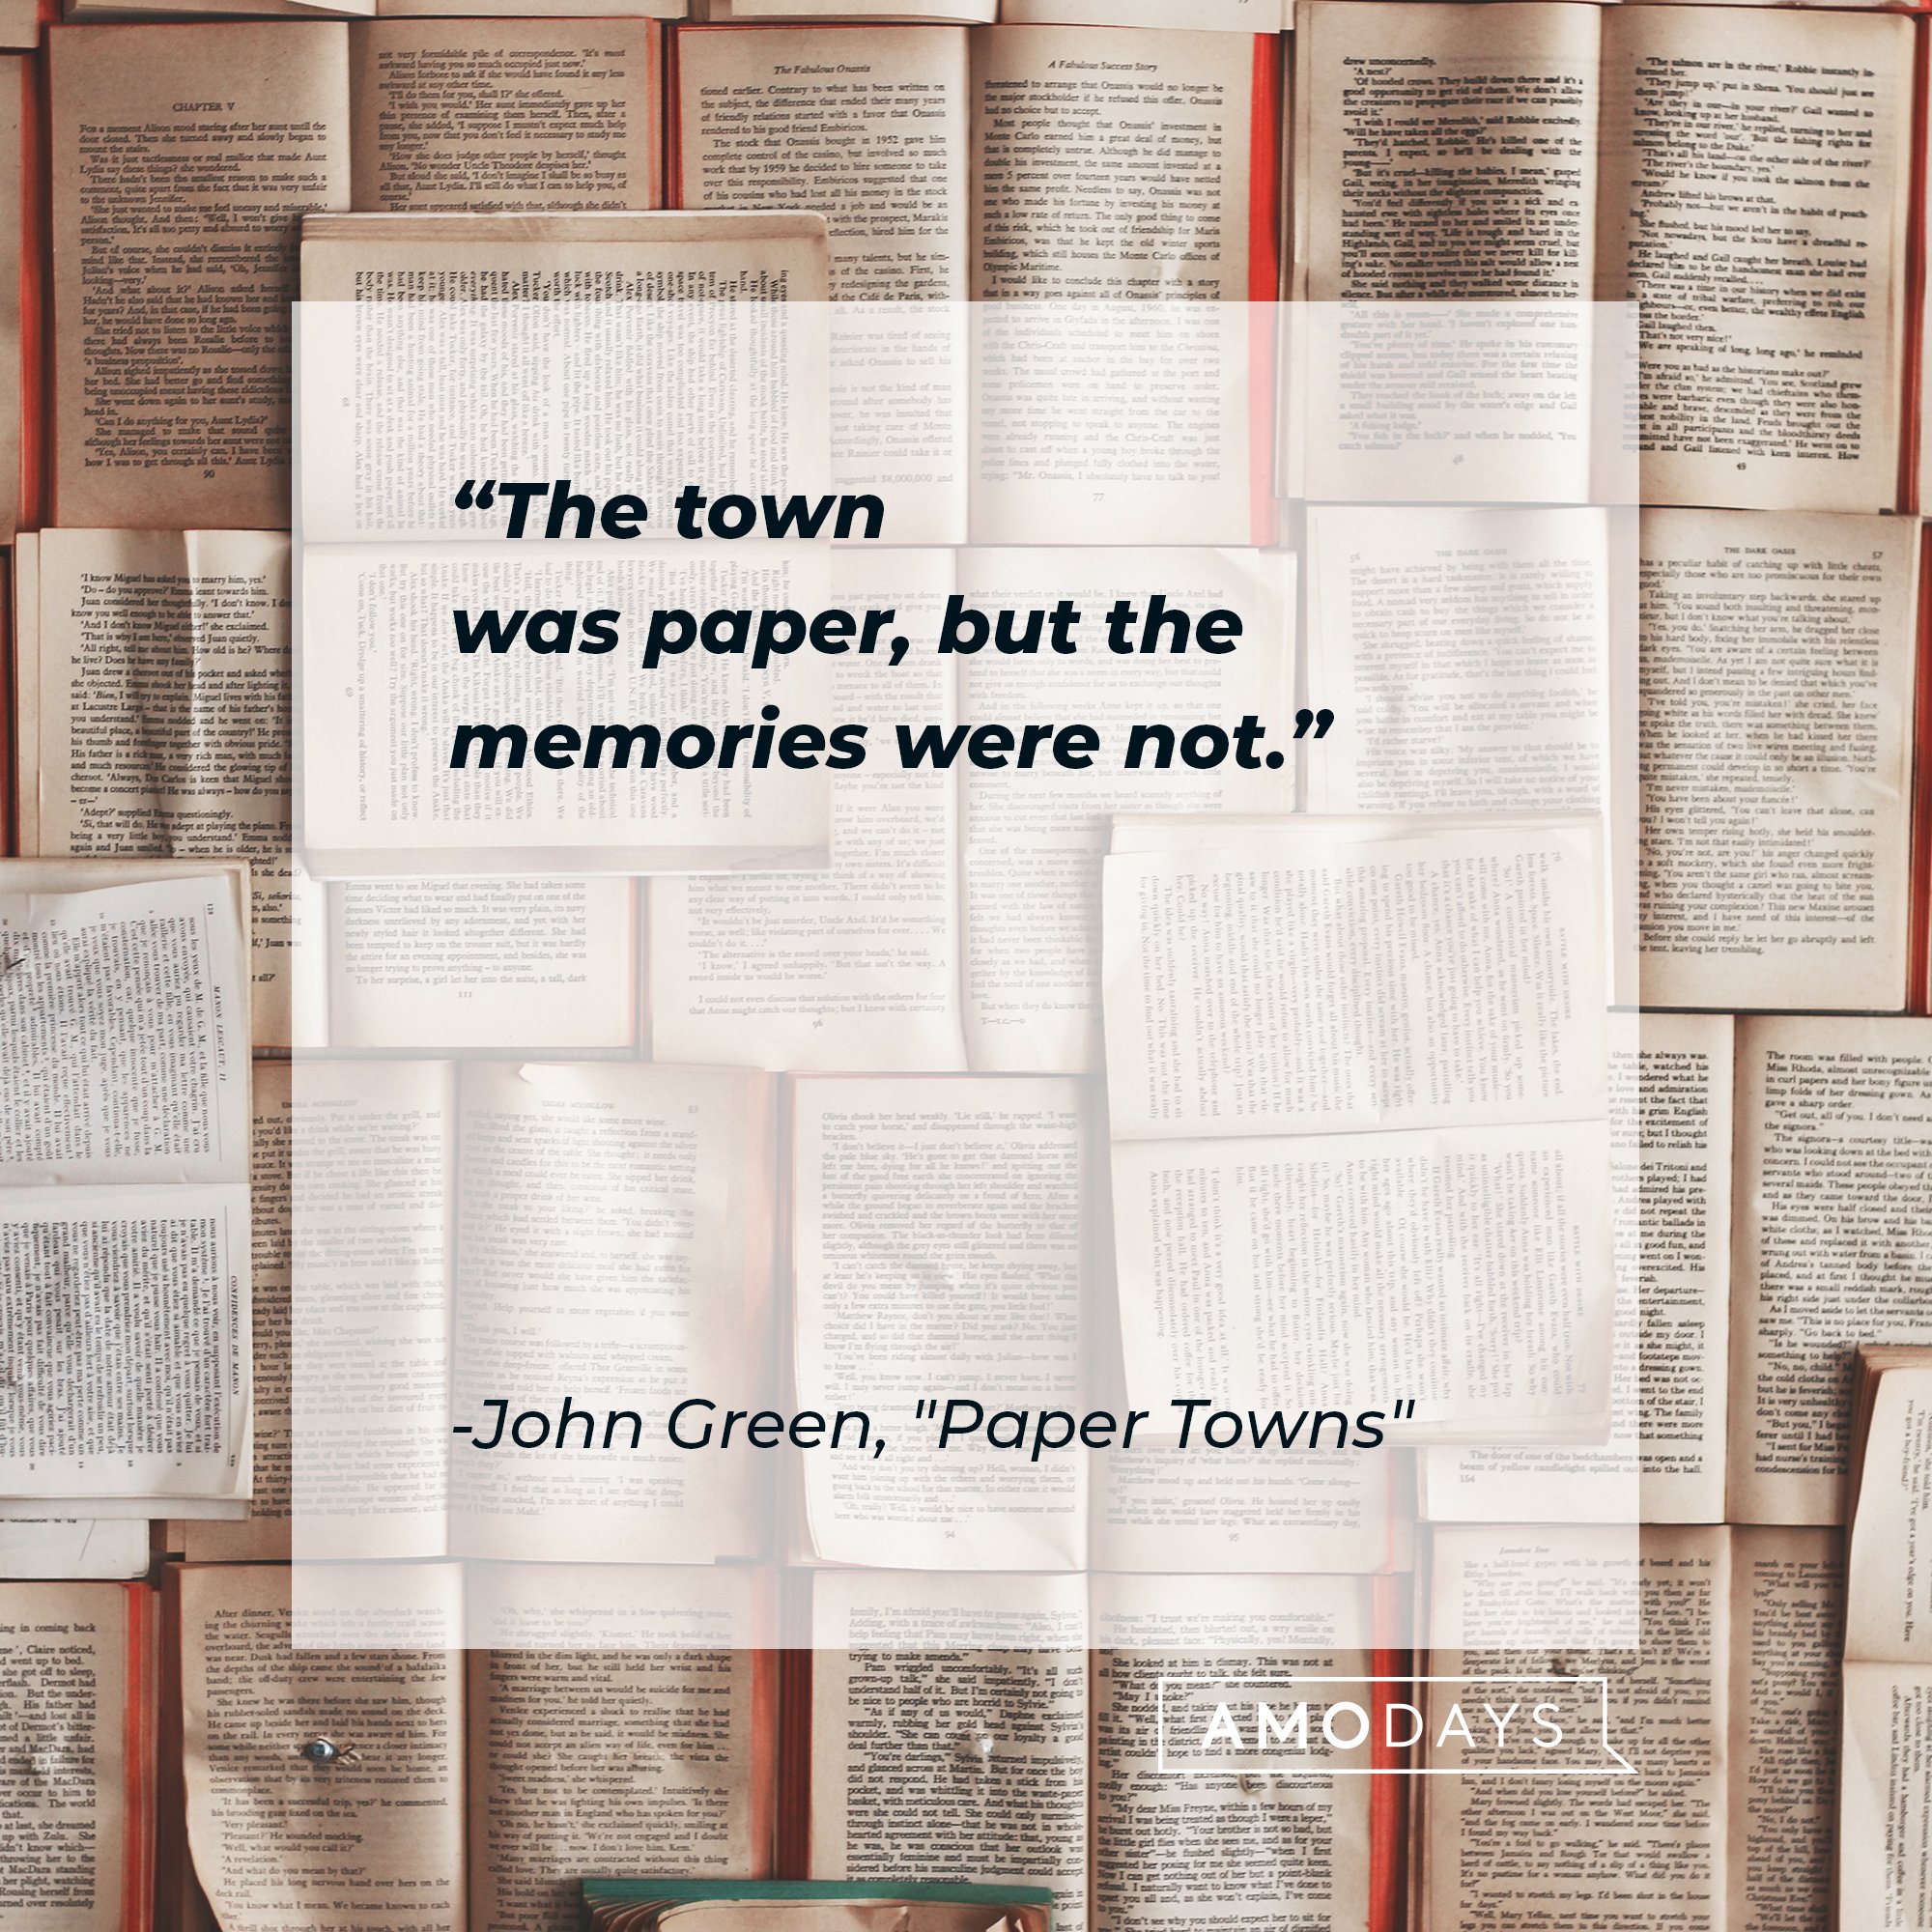 John Green’s quote from “Paper Towns": "The town was paper, but the memories were not." | Image: AmoDays